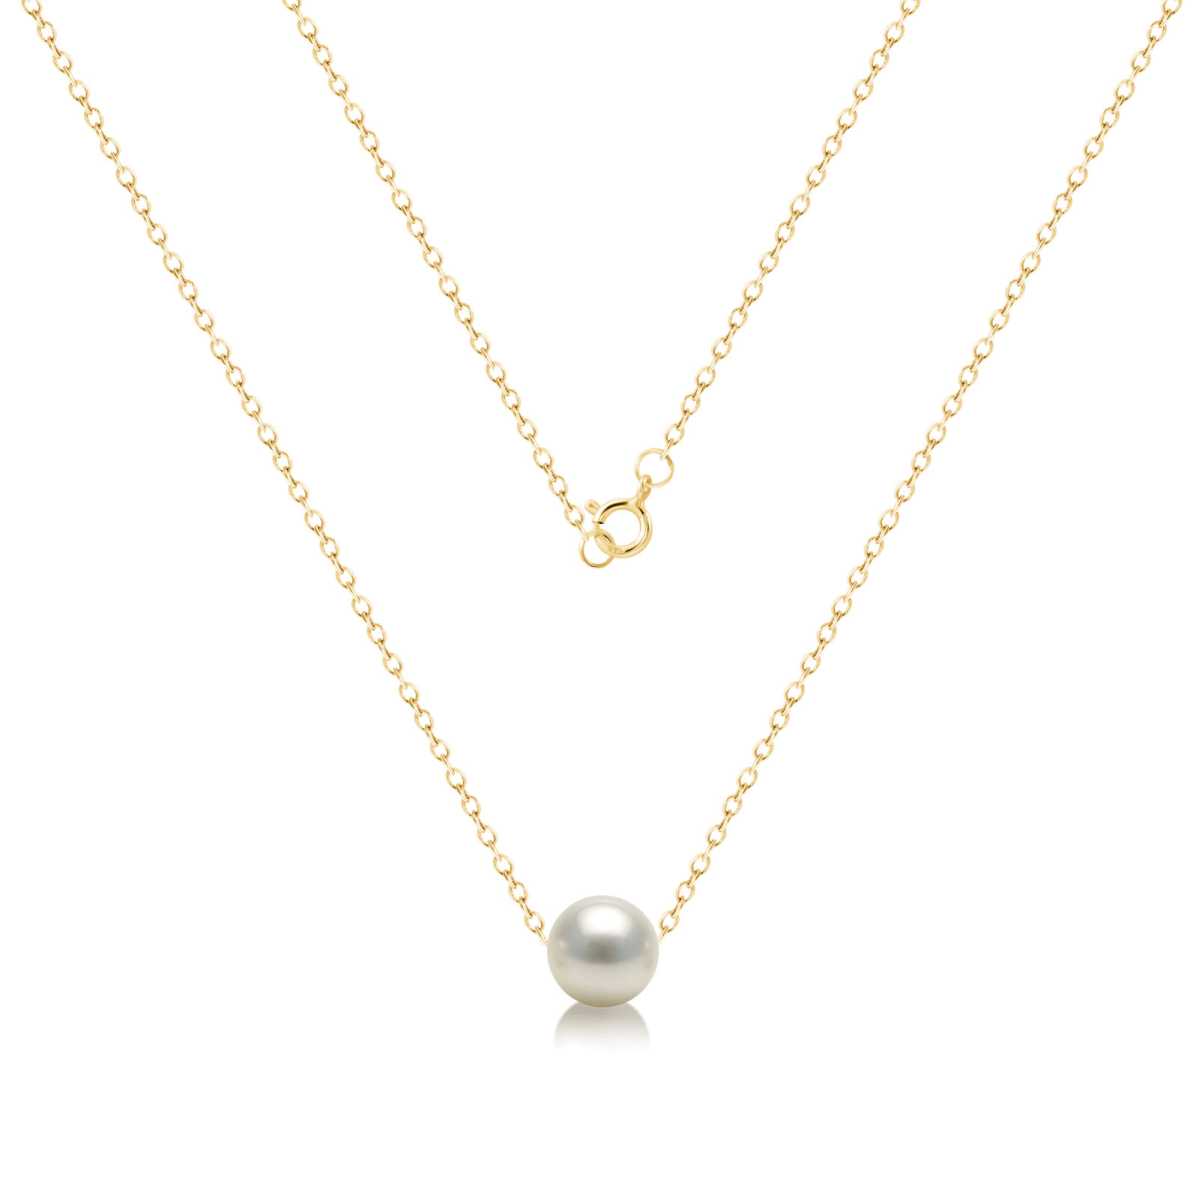 Gold chain and freshwater pearl necklace- | Mali's Canadian Jewelry Made with 14K solid yellow gold chain and spring ring, fresh